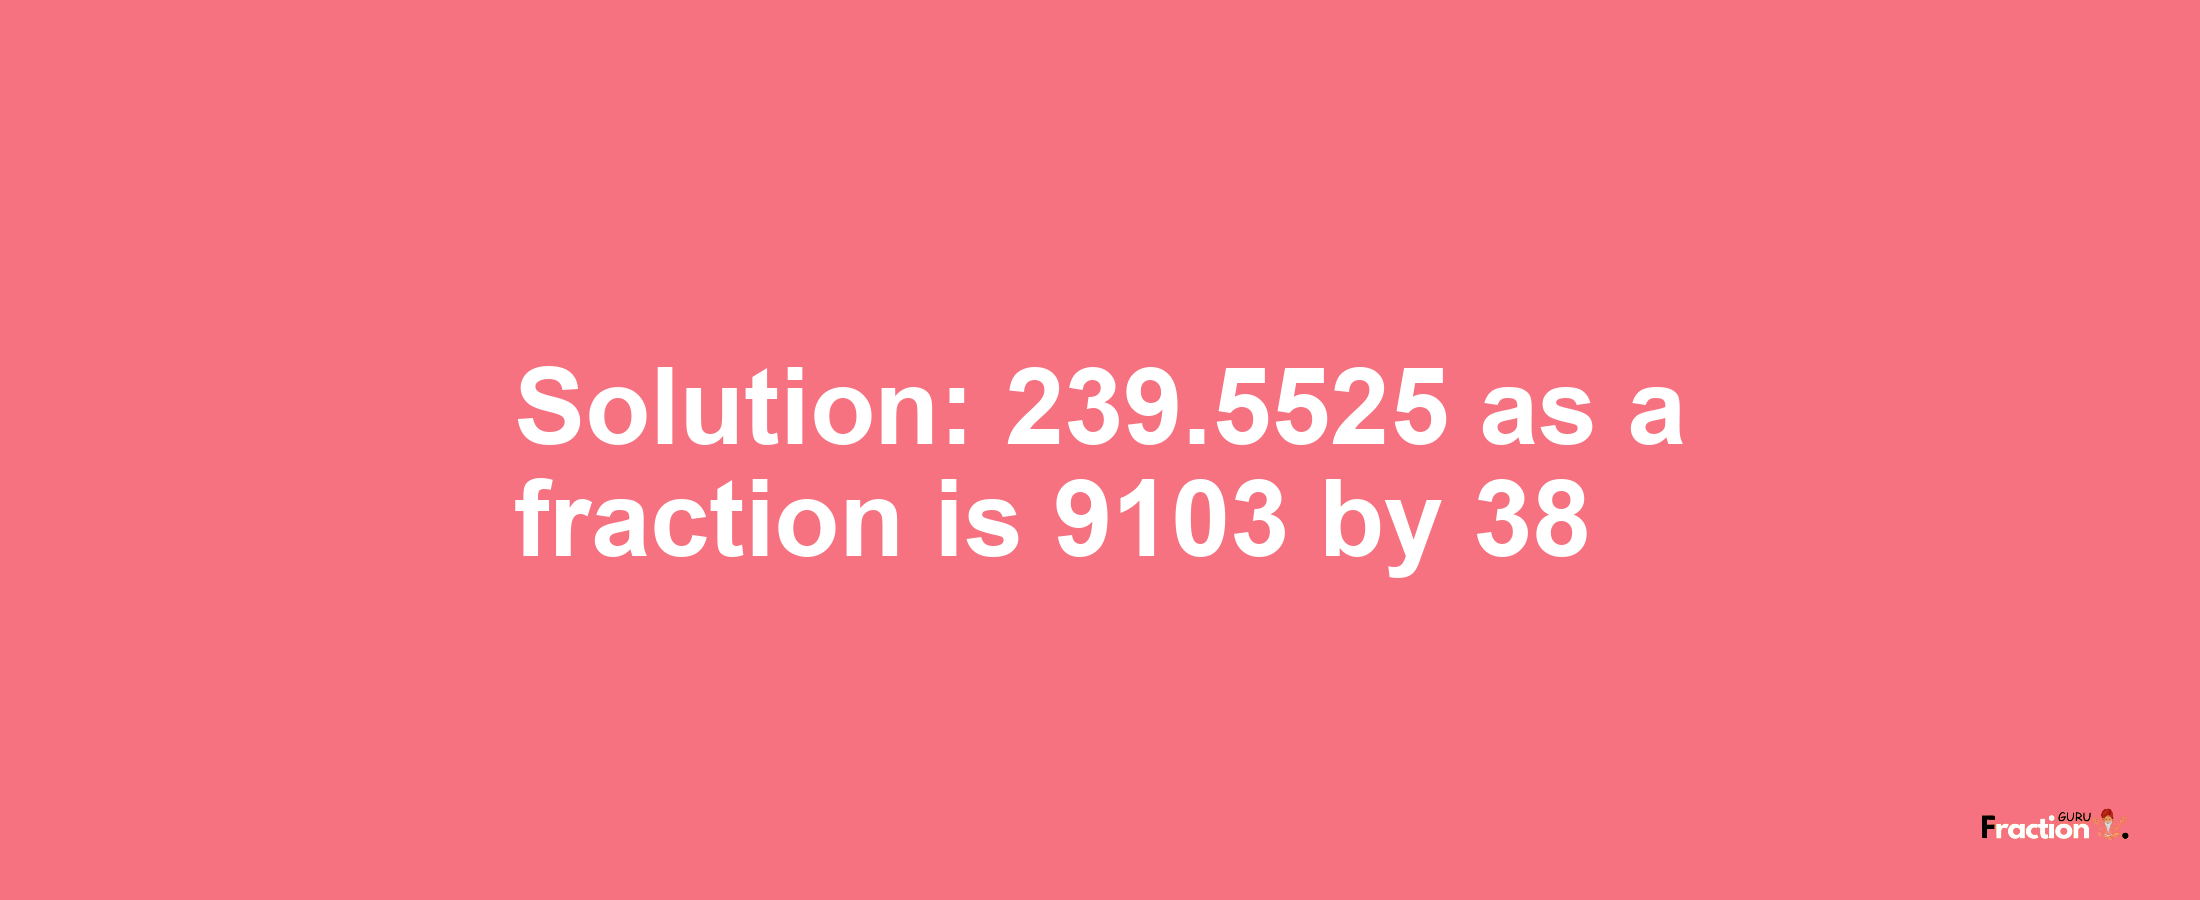 Solution:239.5525 as a fraction is 9103/38